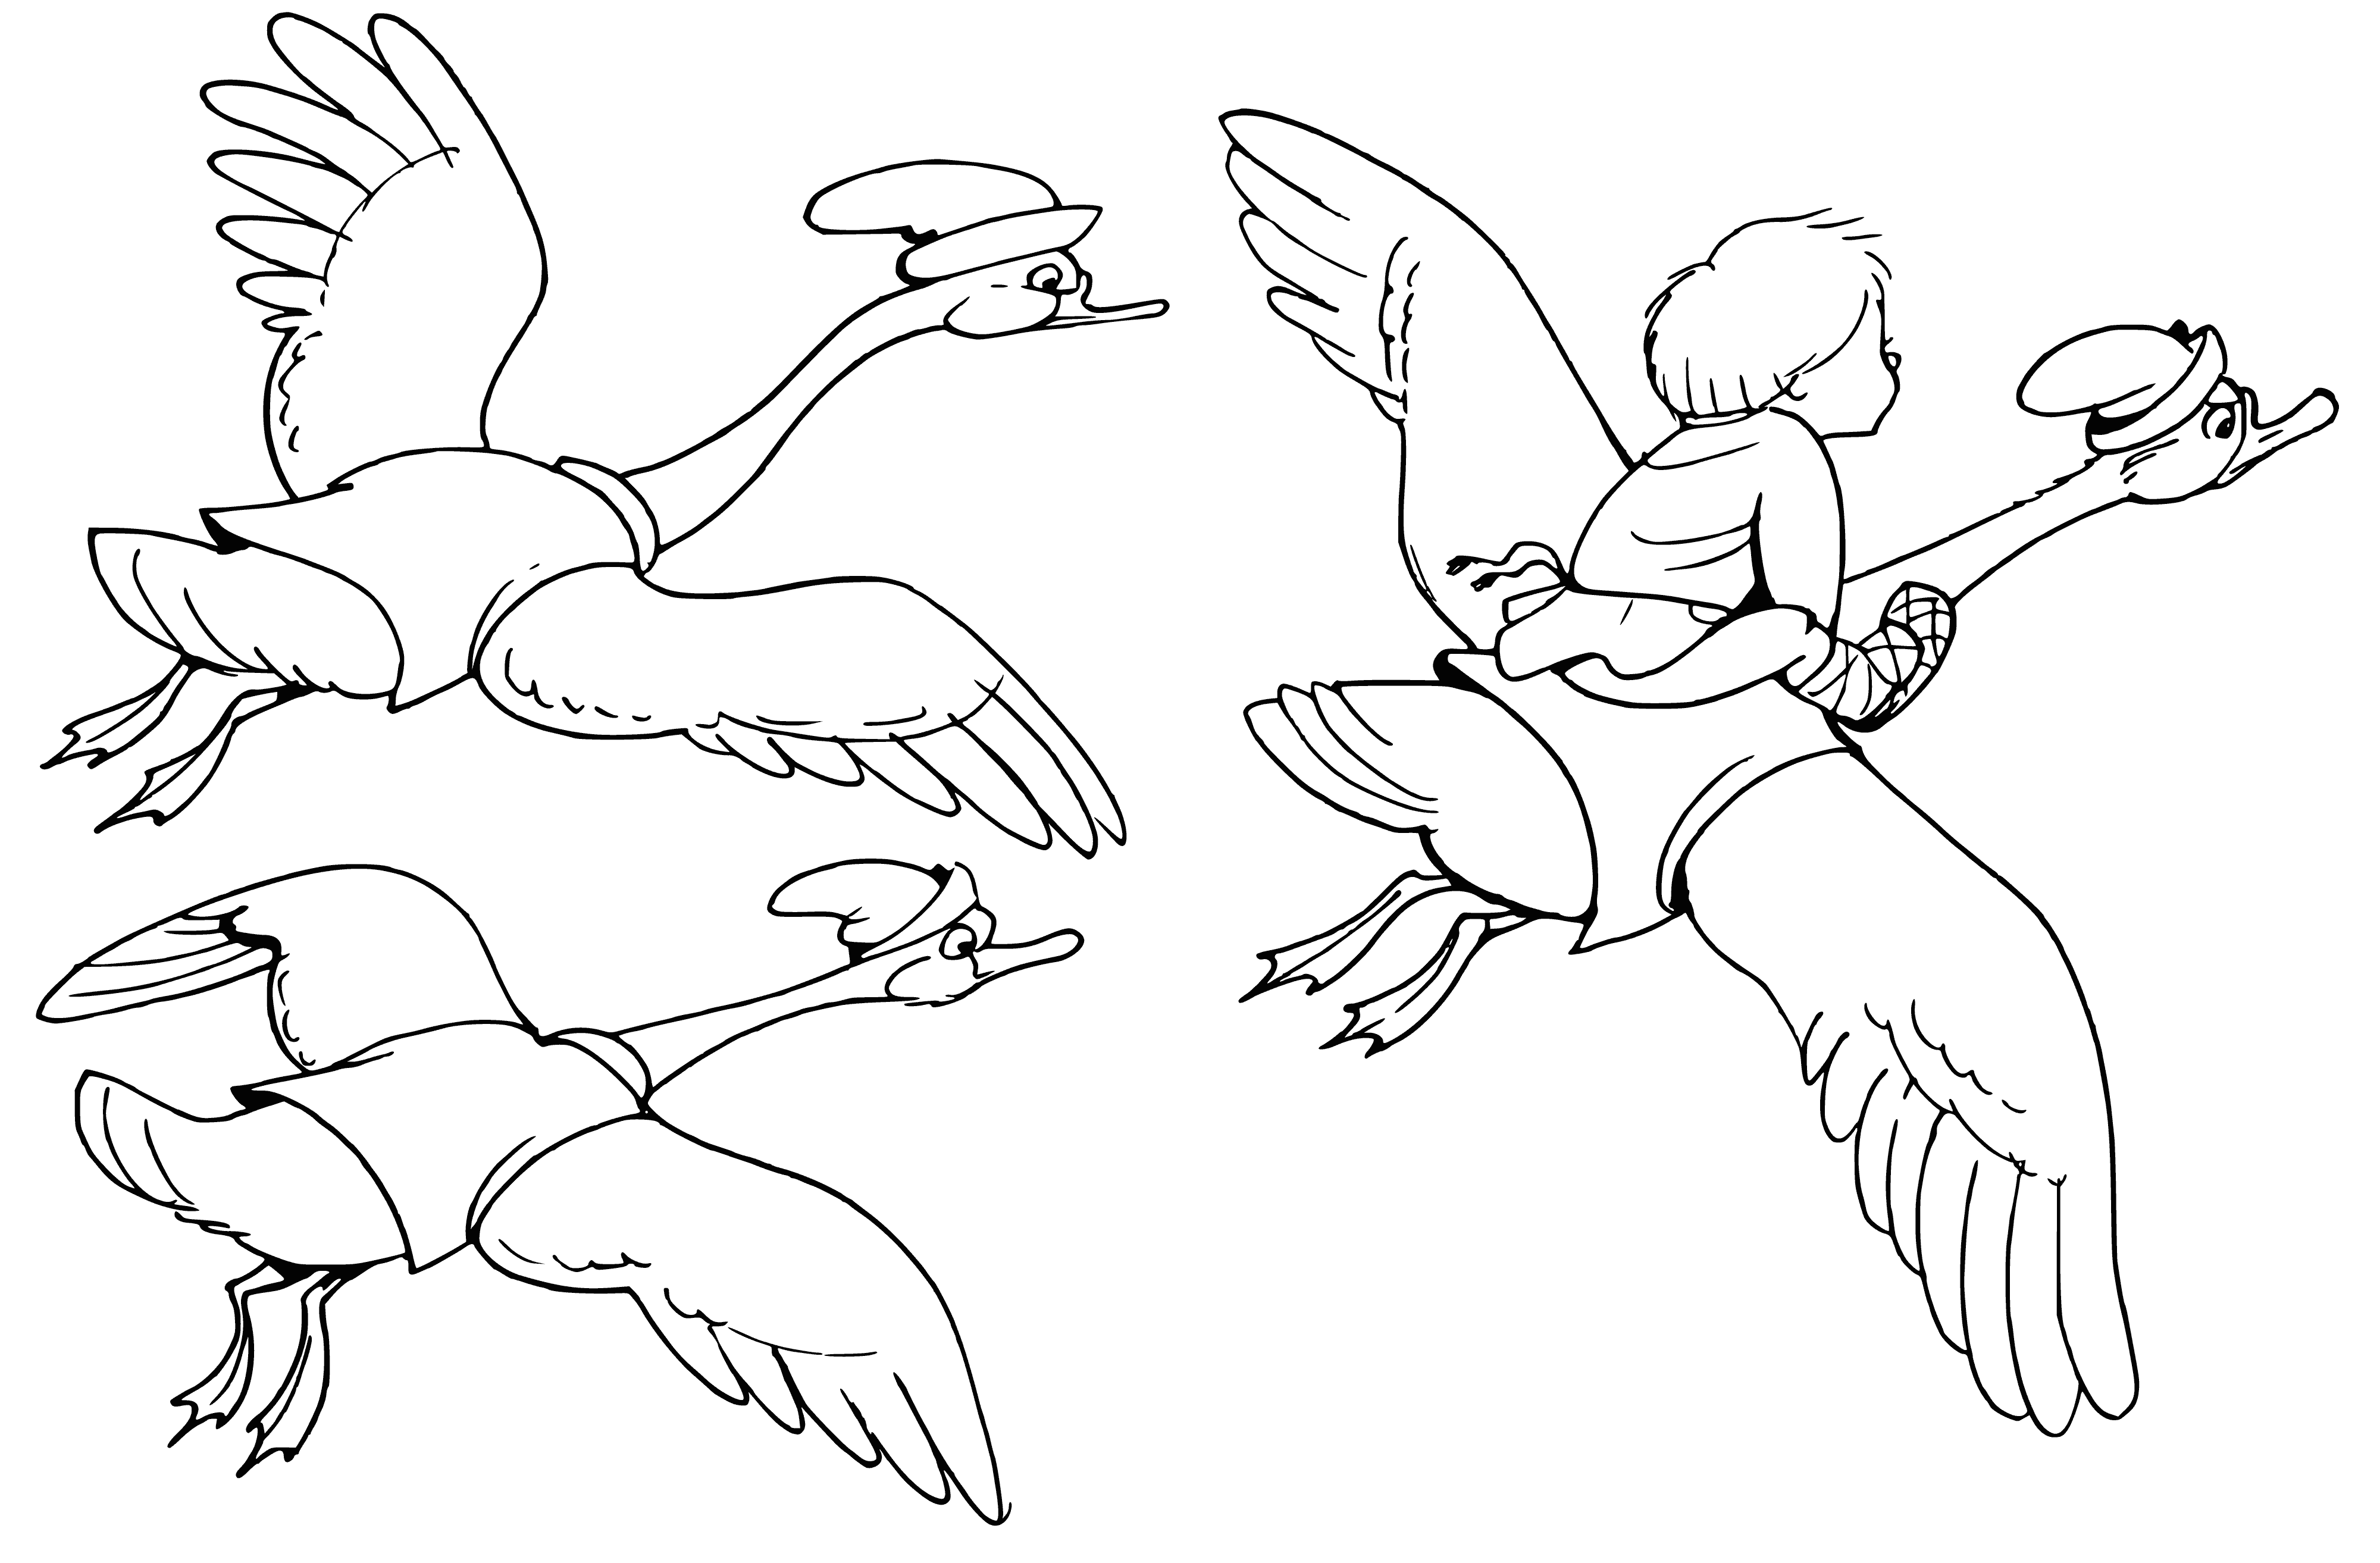 Geese carry away Ivanushka coloring page